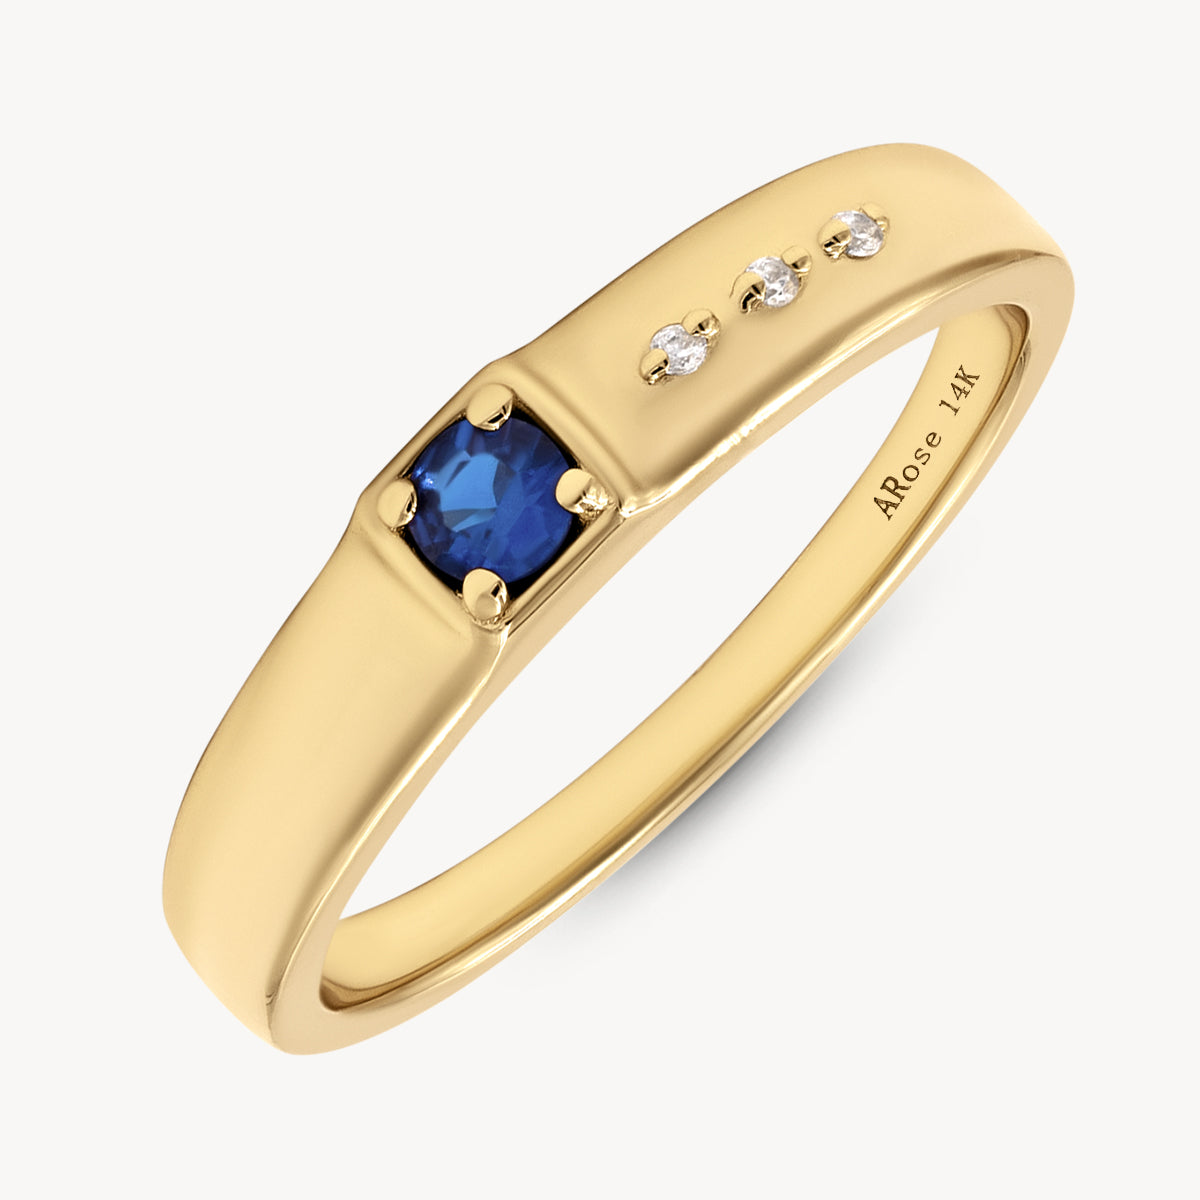 Audry Sapphire Ring